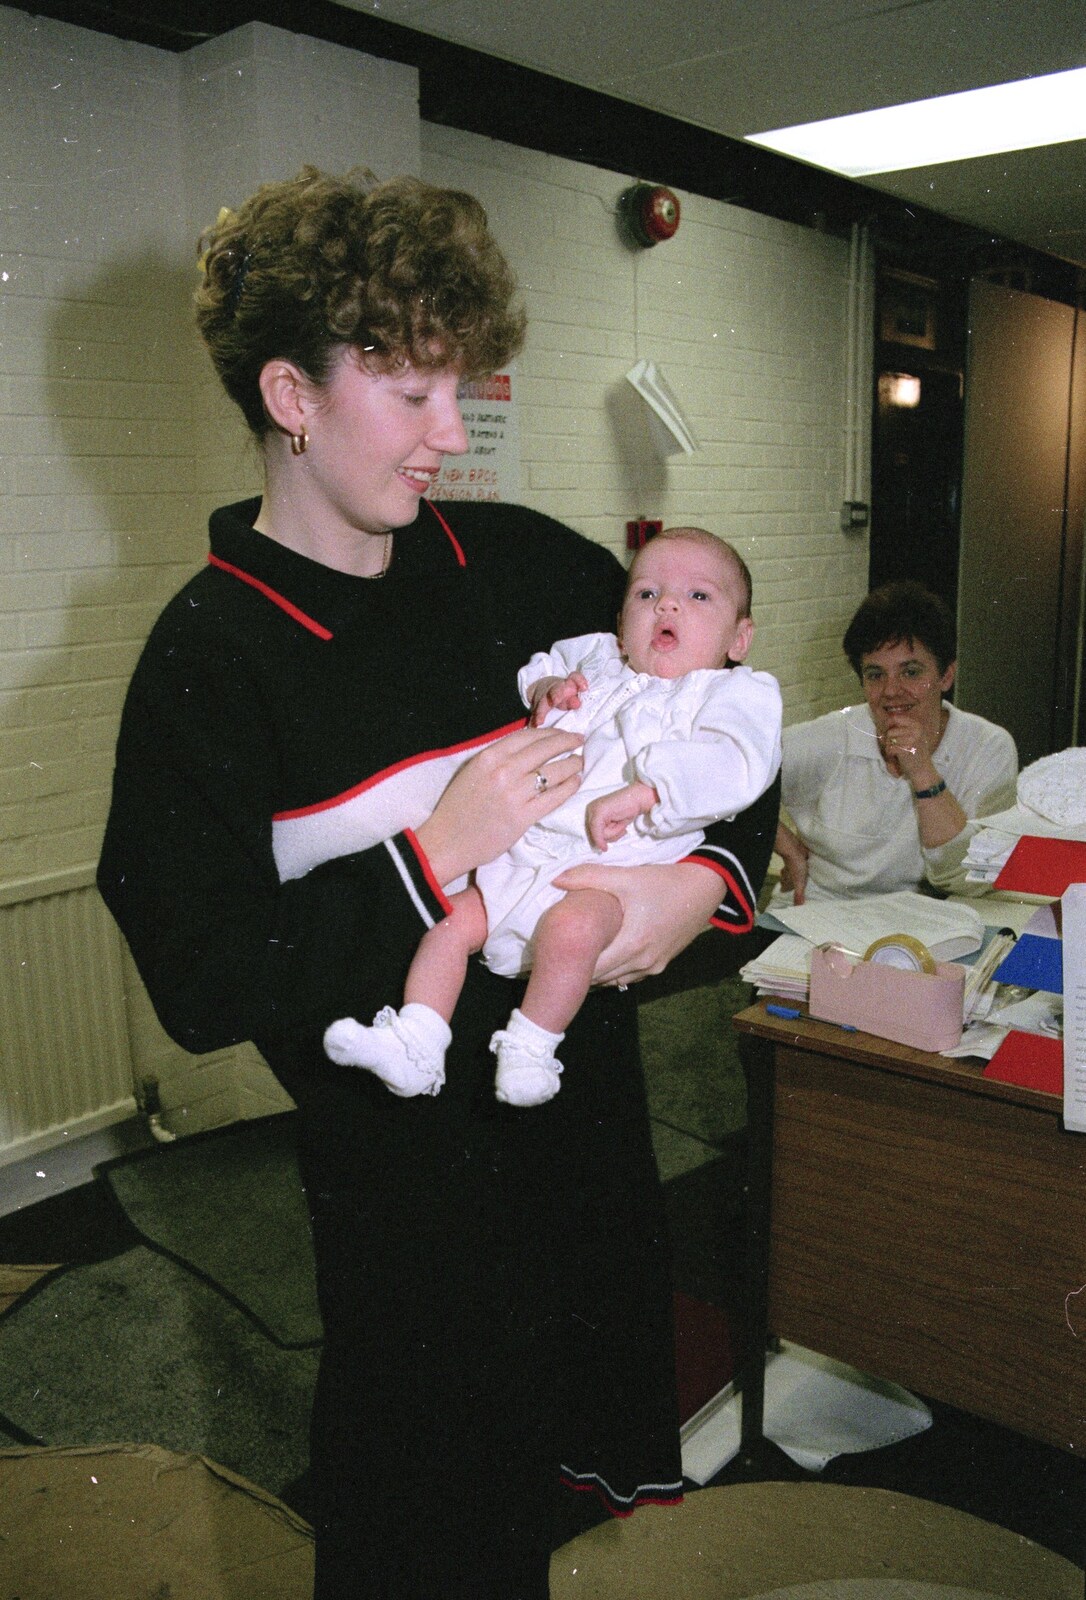 A Trip to Plymouth and Bristol, Avon and Devon - 18th February 1990: Back in the office, Monique shows off her new sprog